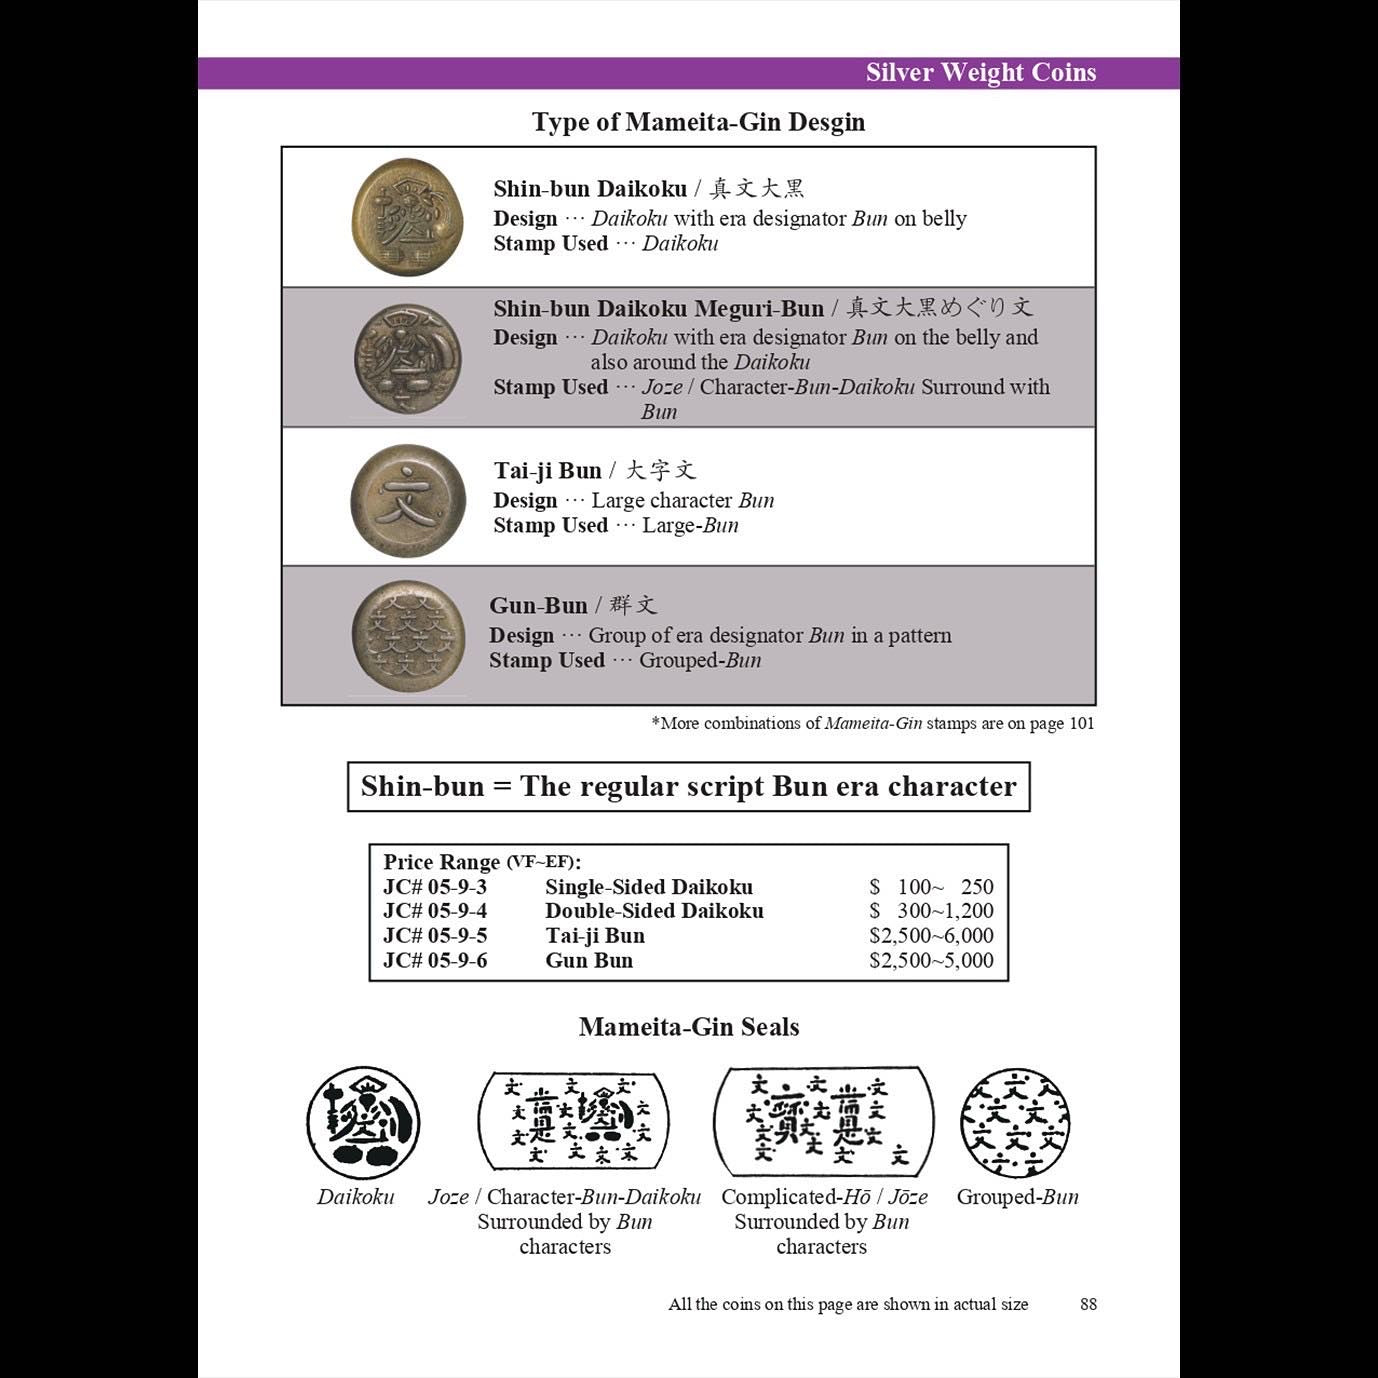 The Standard Catalog of Japanese Coins